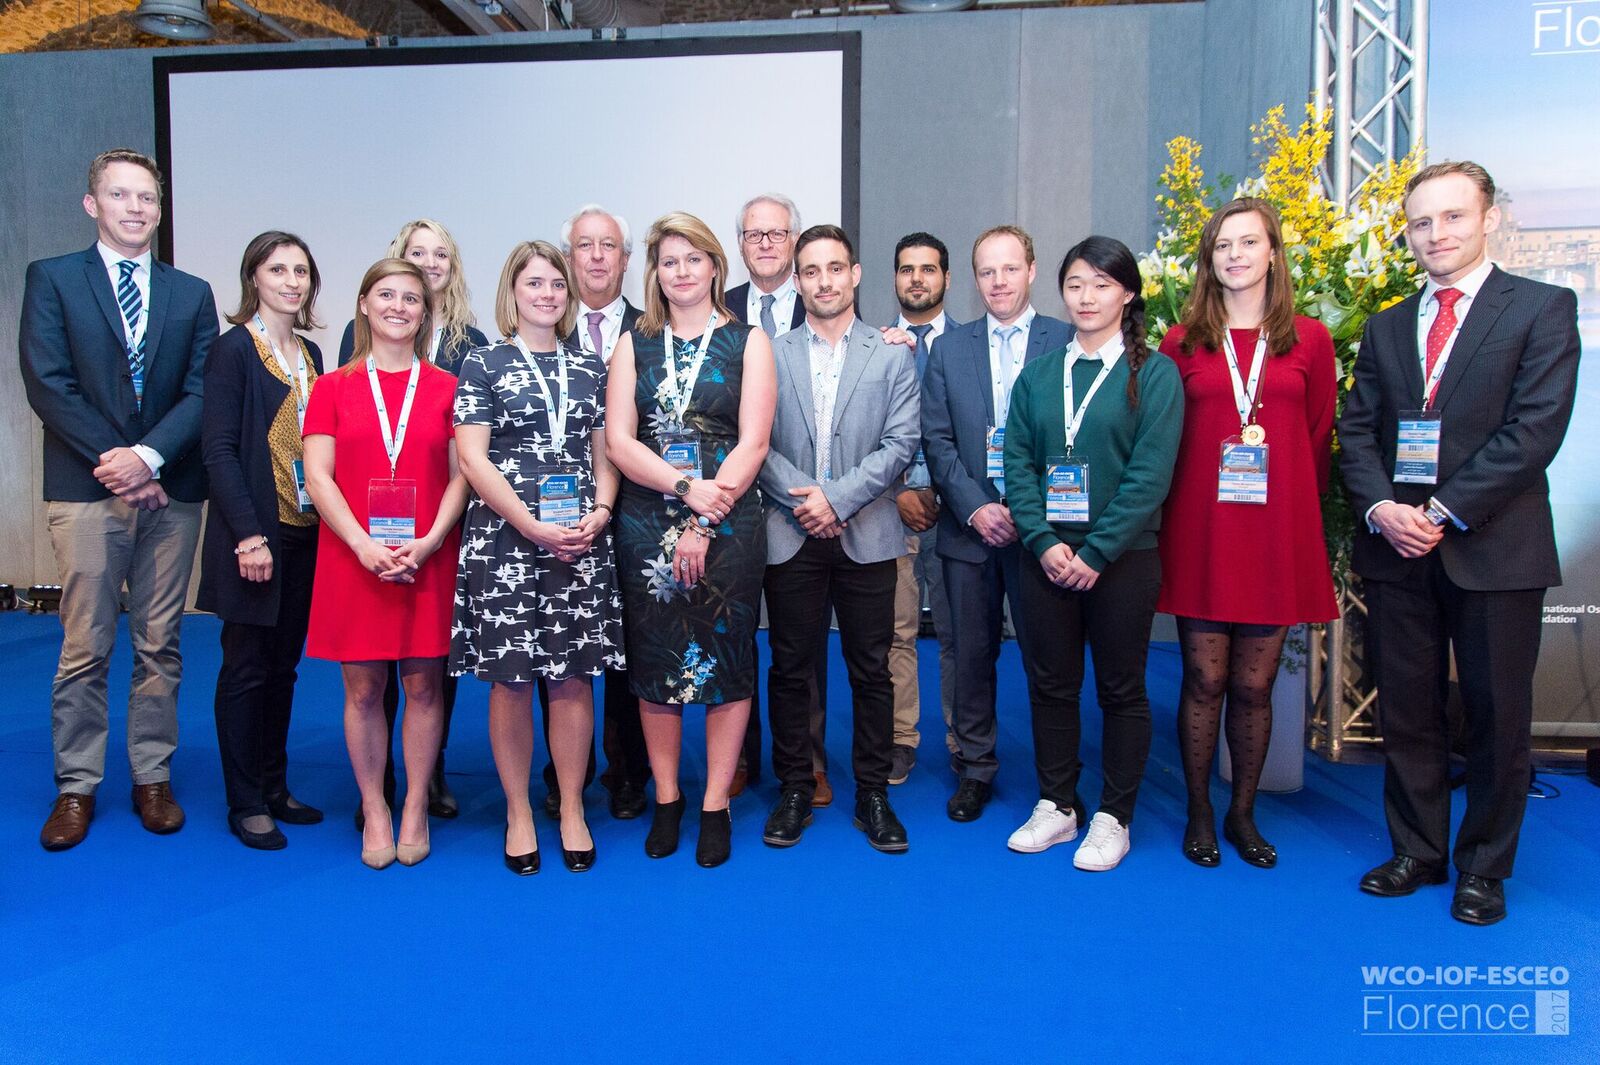 Research from the Hertfordshire Cohort Study recognised at World Congress.